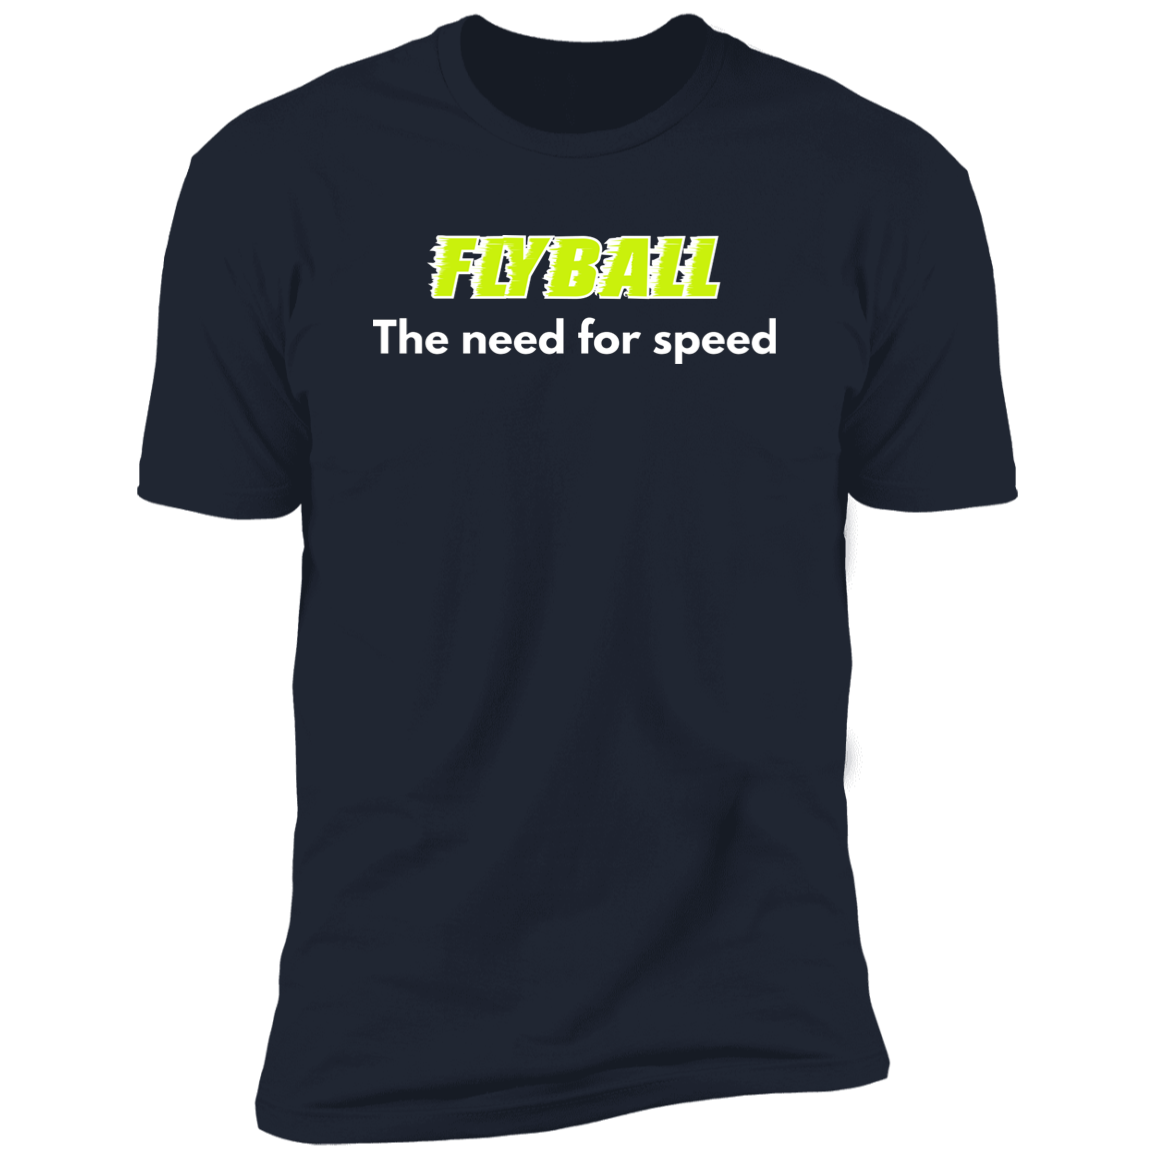 Flyball The Need For Speed dog shirt, dog shirt for humans, sporting dog shirt, in navy blue